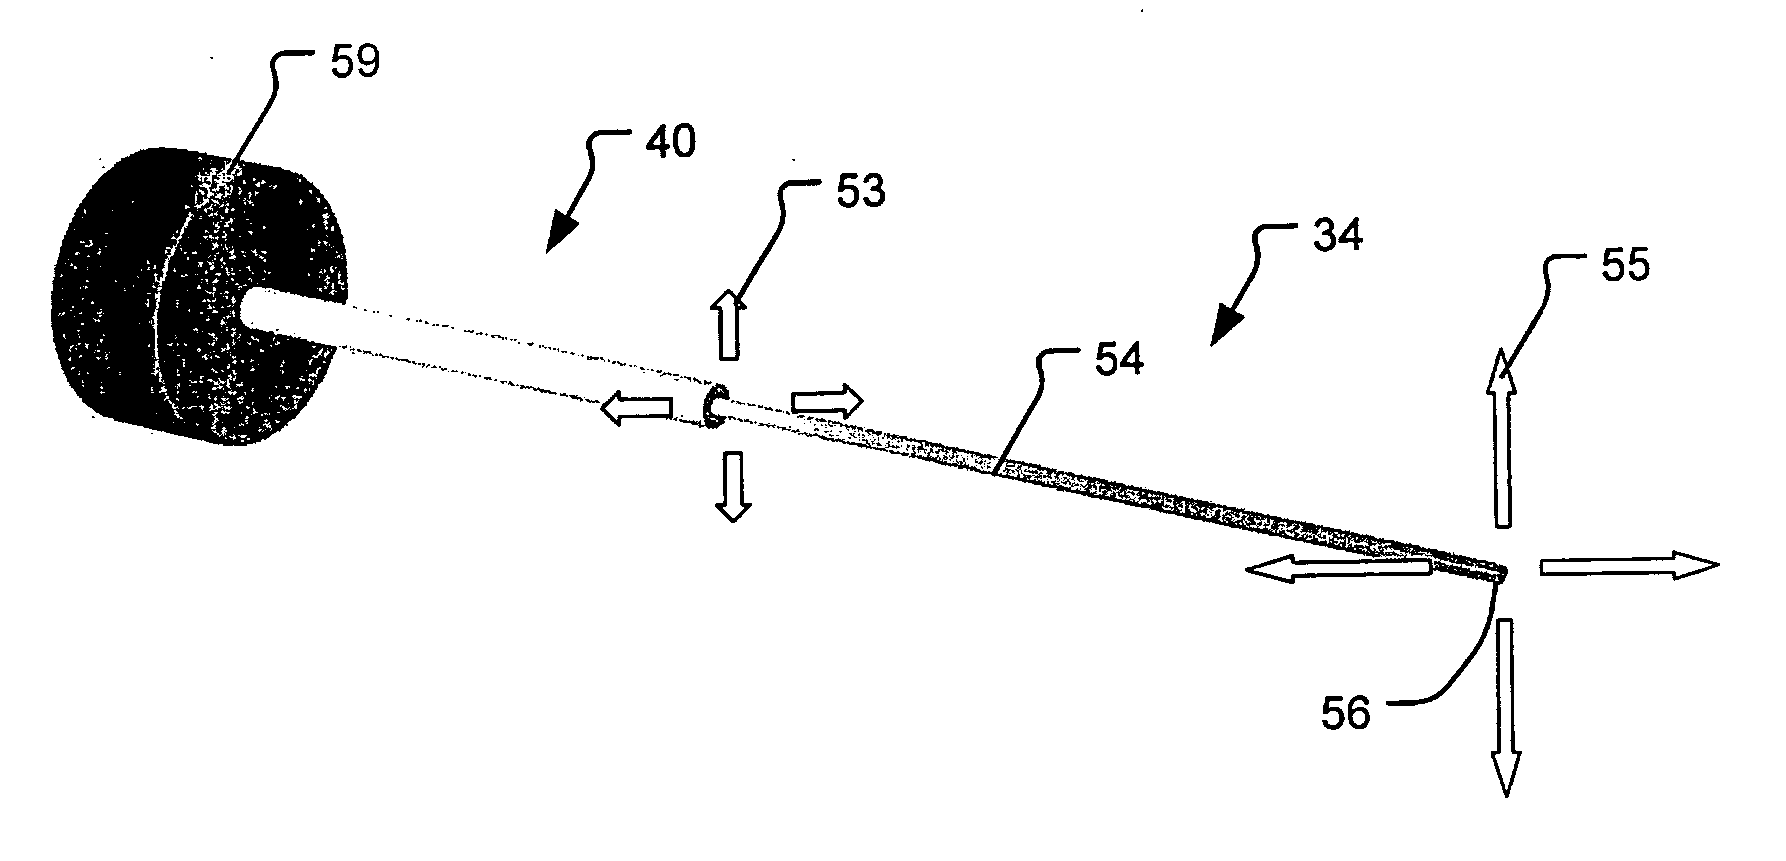 Methods and systems for counterbalancing a scanning beam device